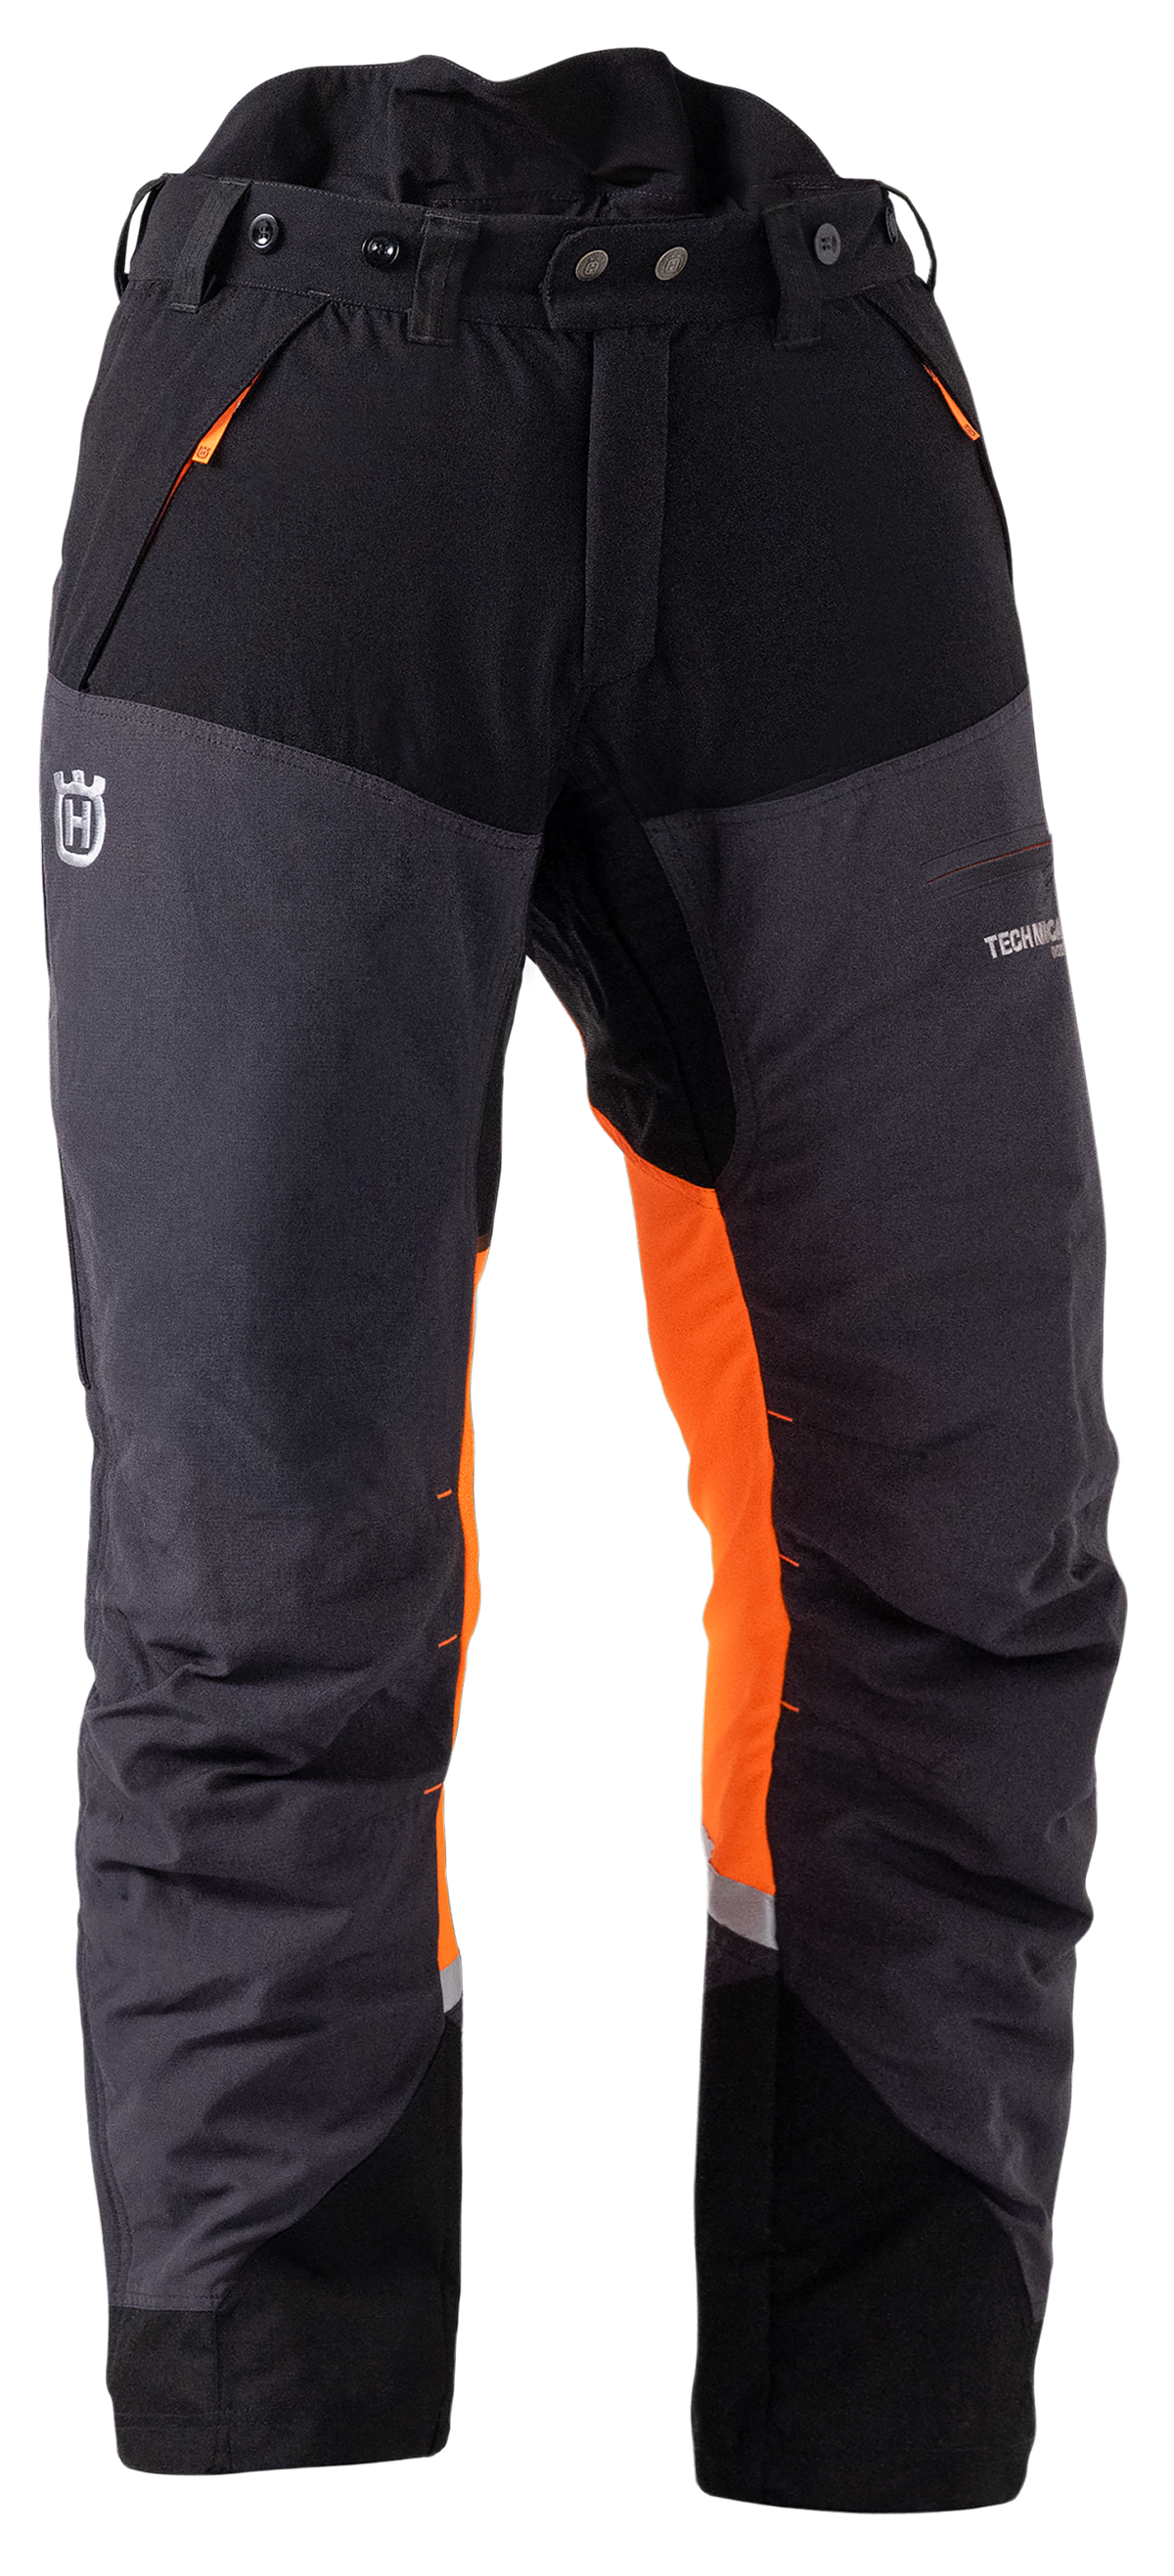 SALE Husqvarna Technical Extreme Arbor Chainsaw Trousers - Strathbogie  Forest & Garden